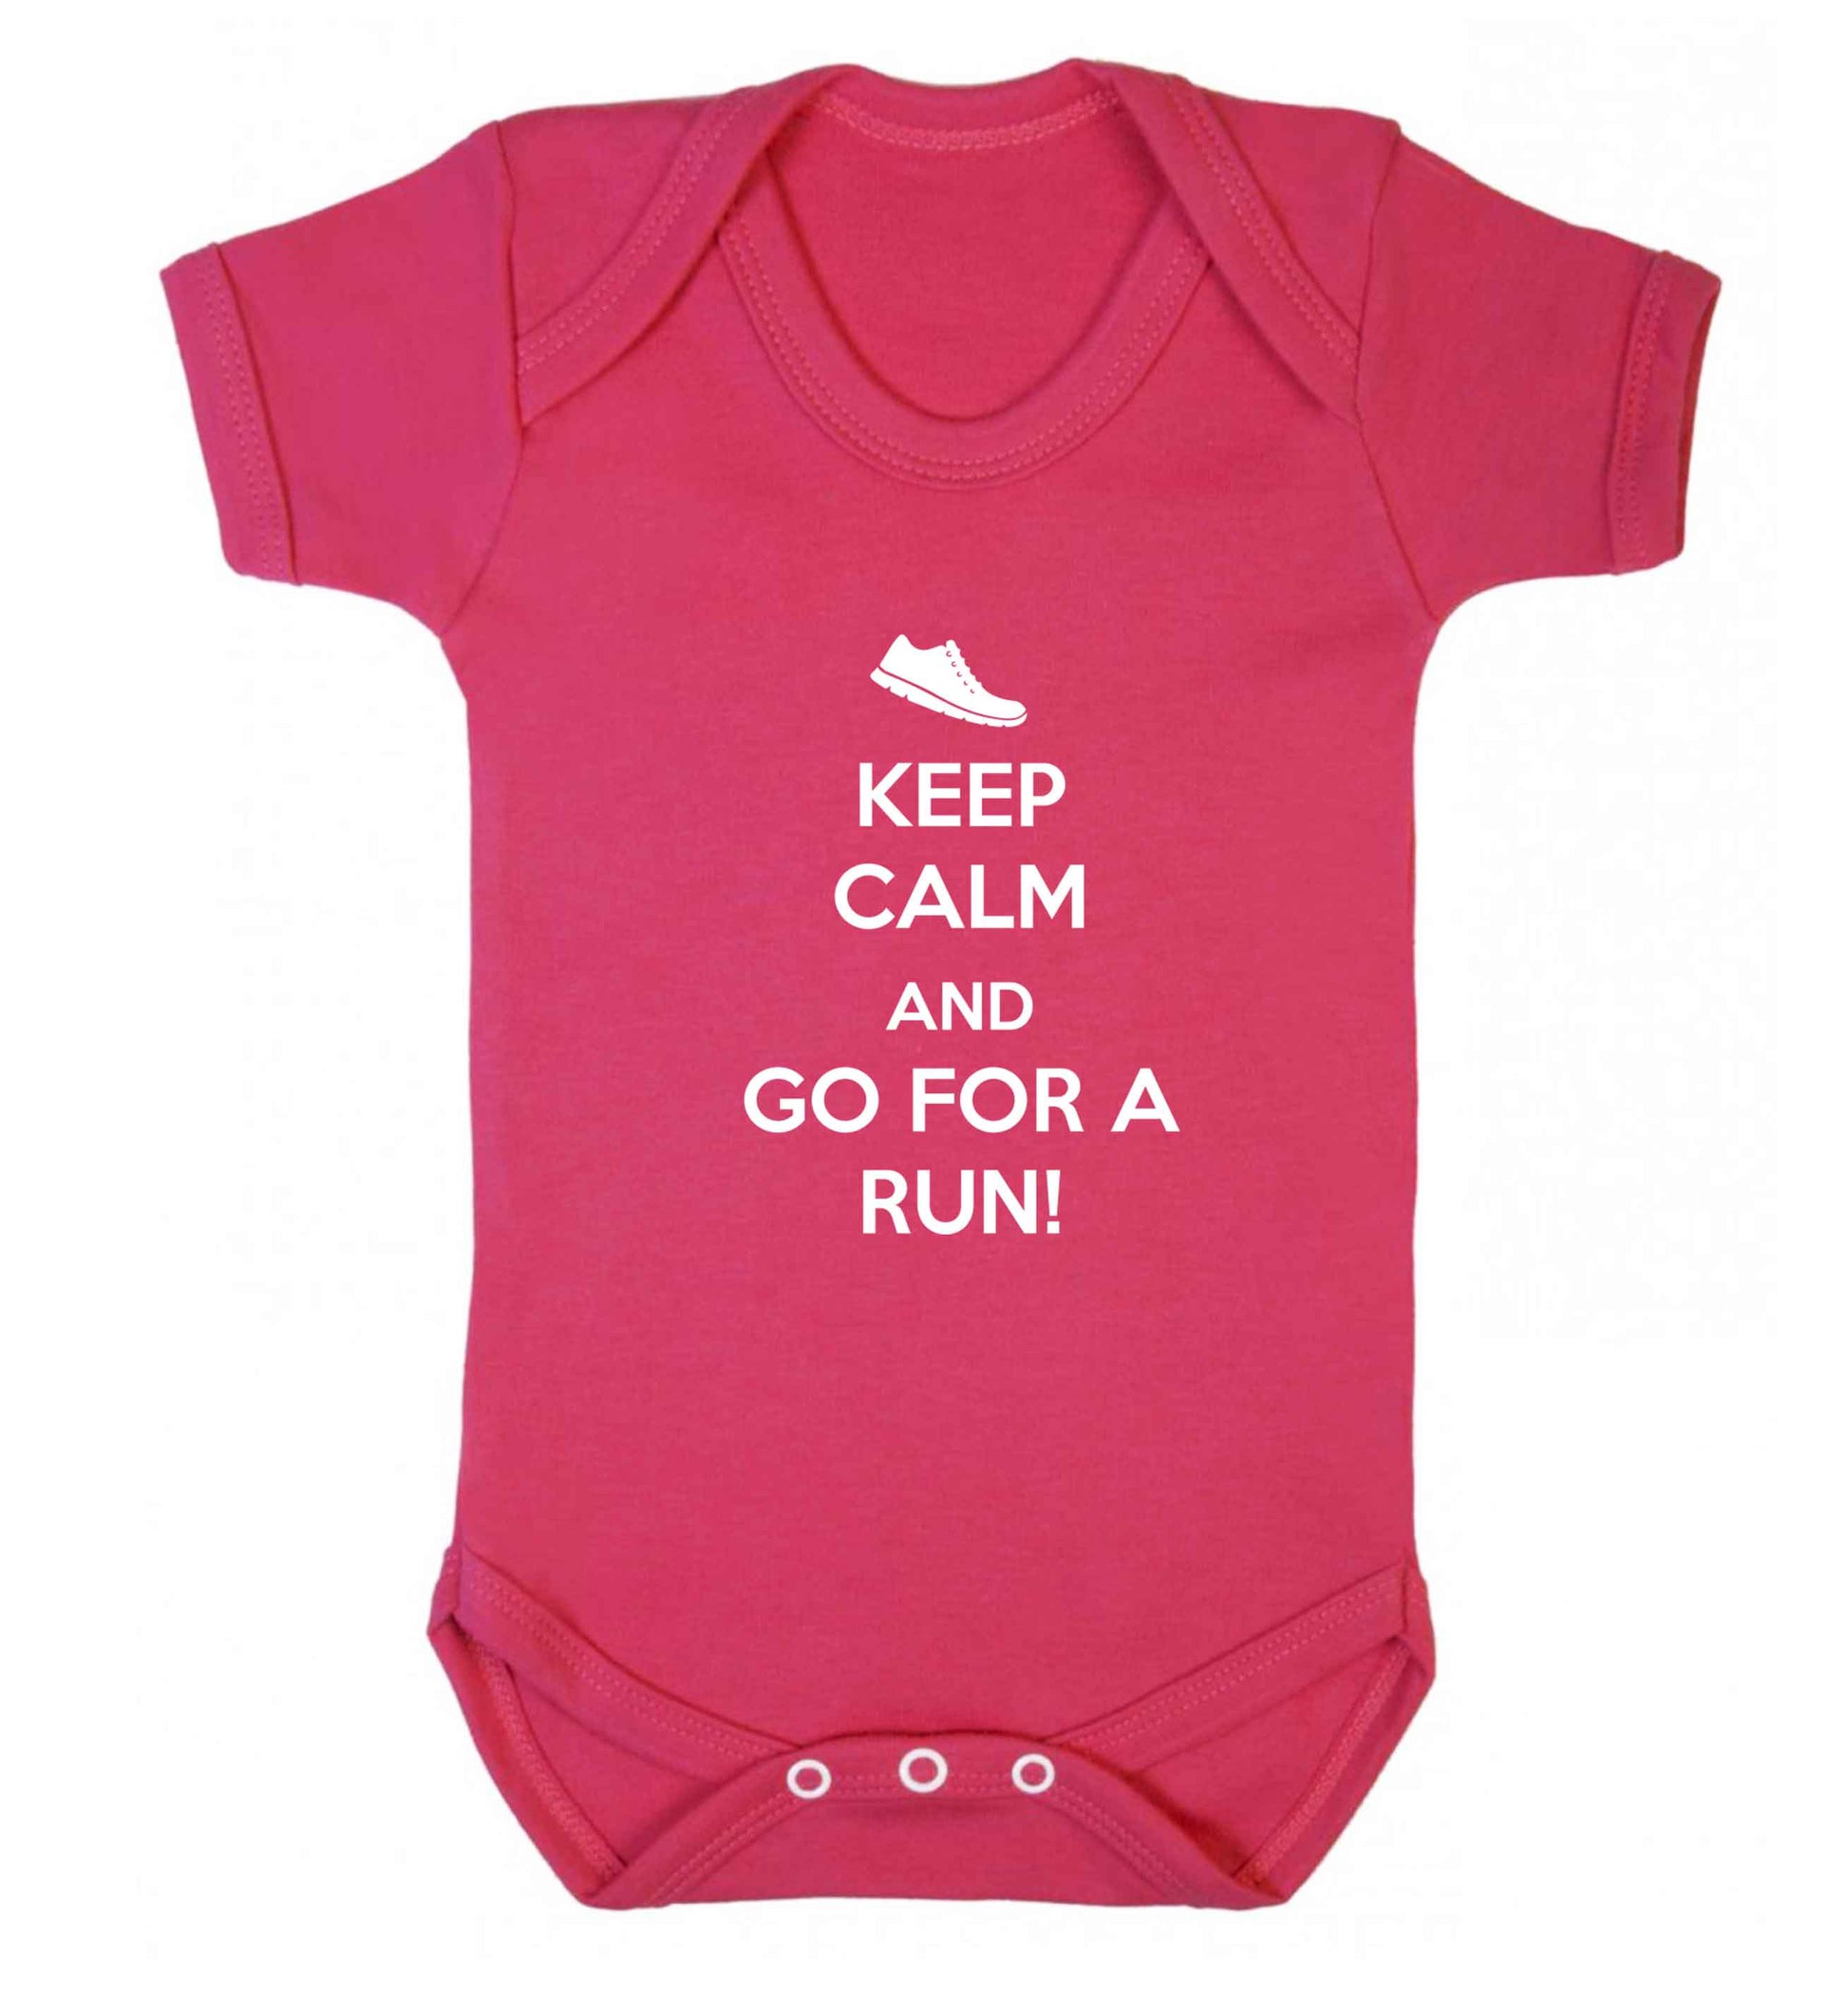 Keep calm and go for a run baby vest dark pink 18-24 months